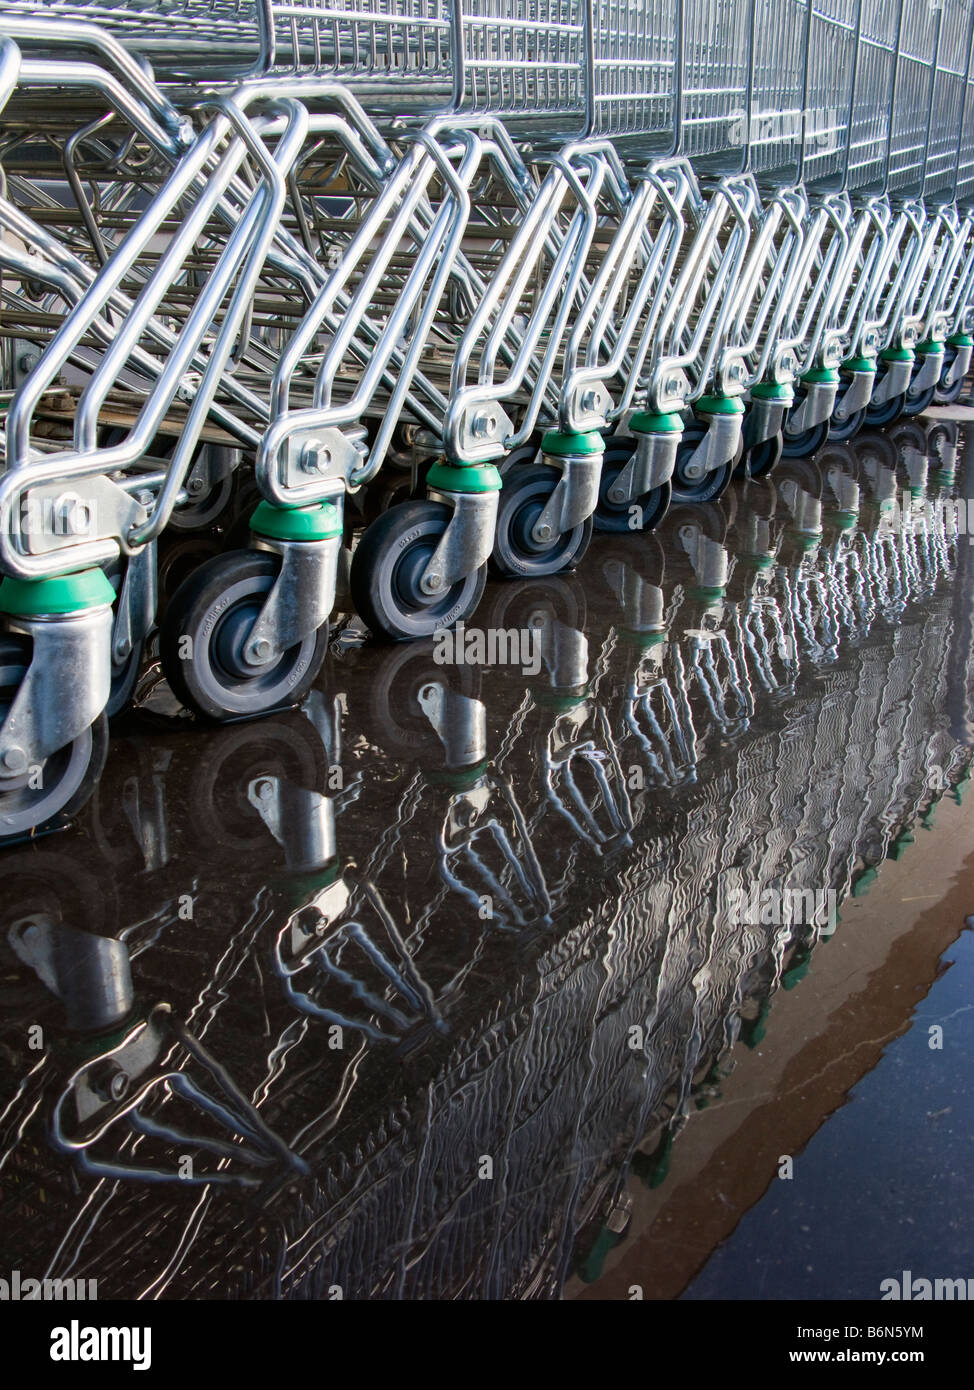 Shopping trolleys parked in puddle Stock Photo